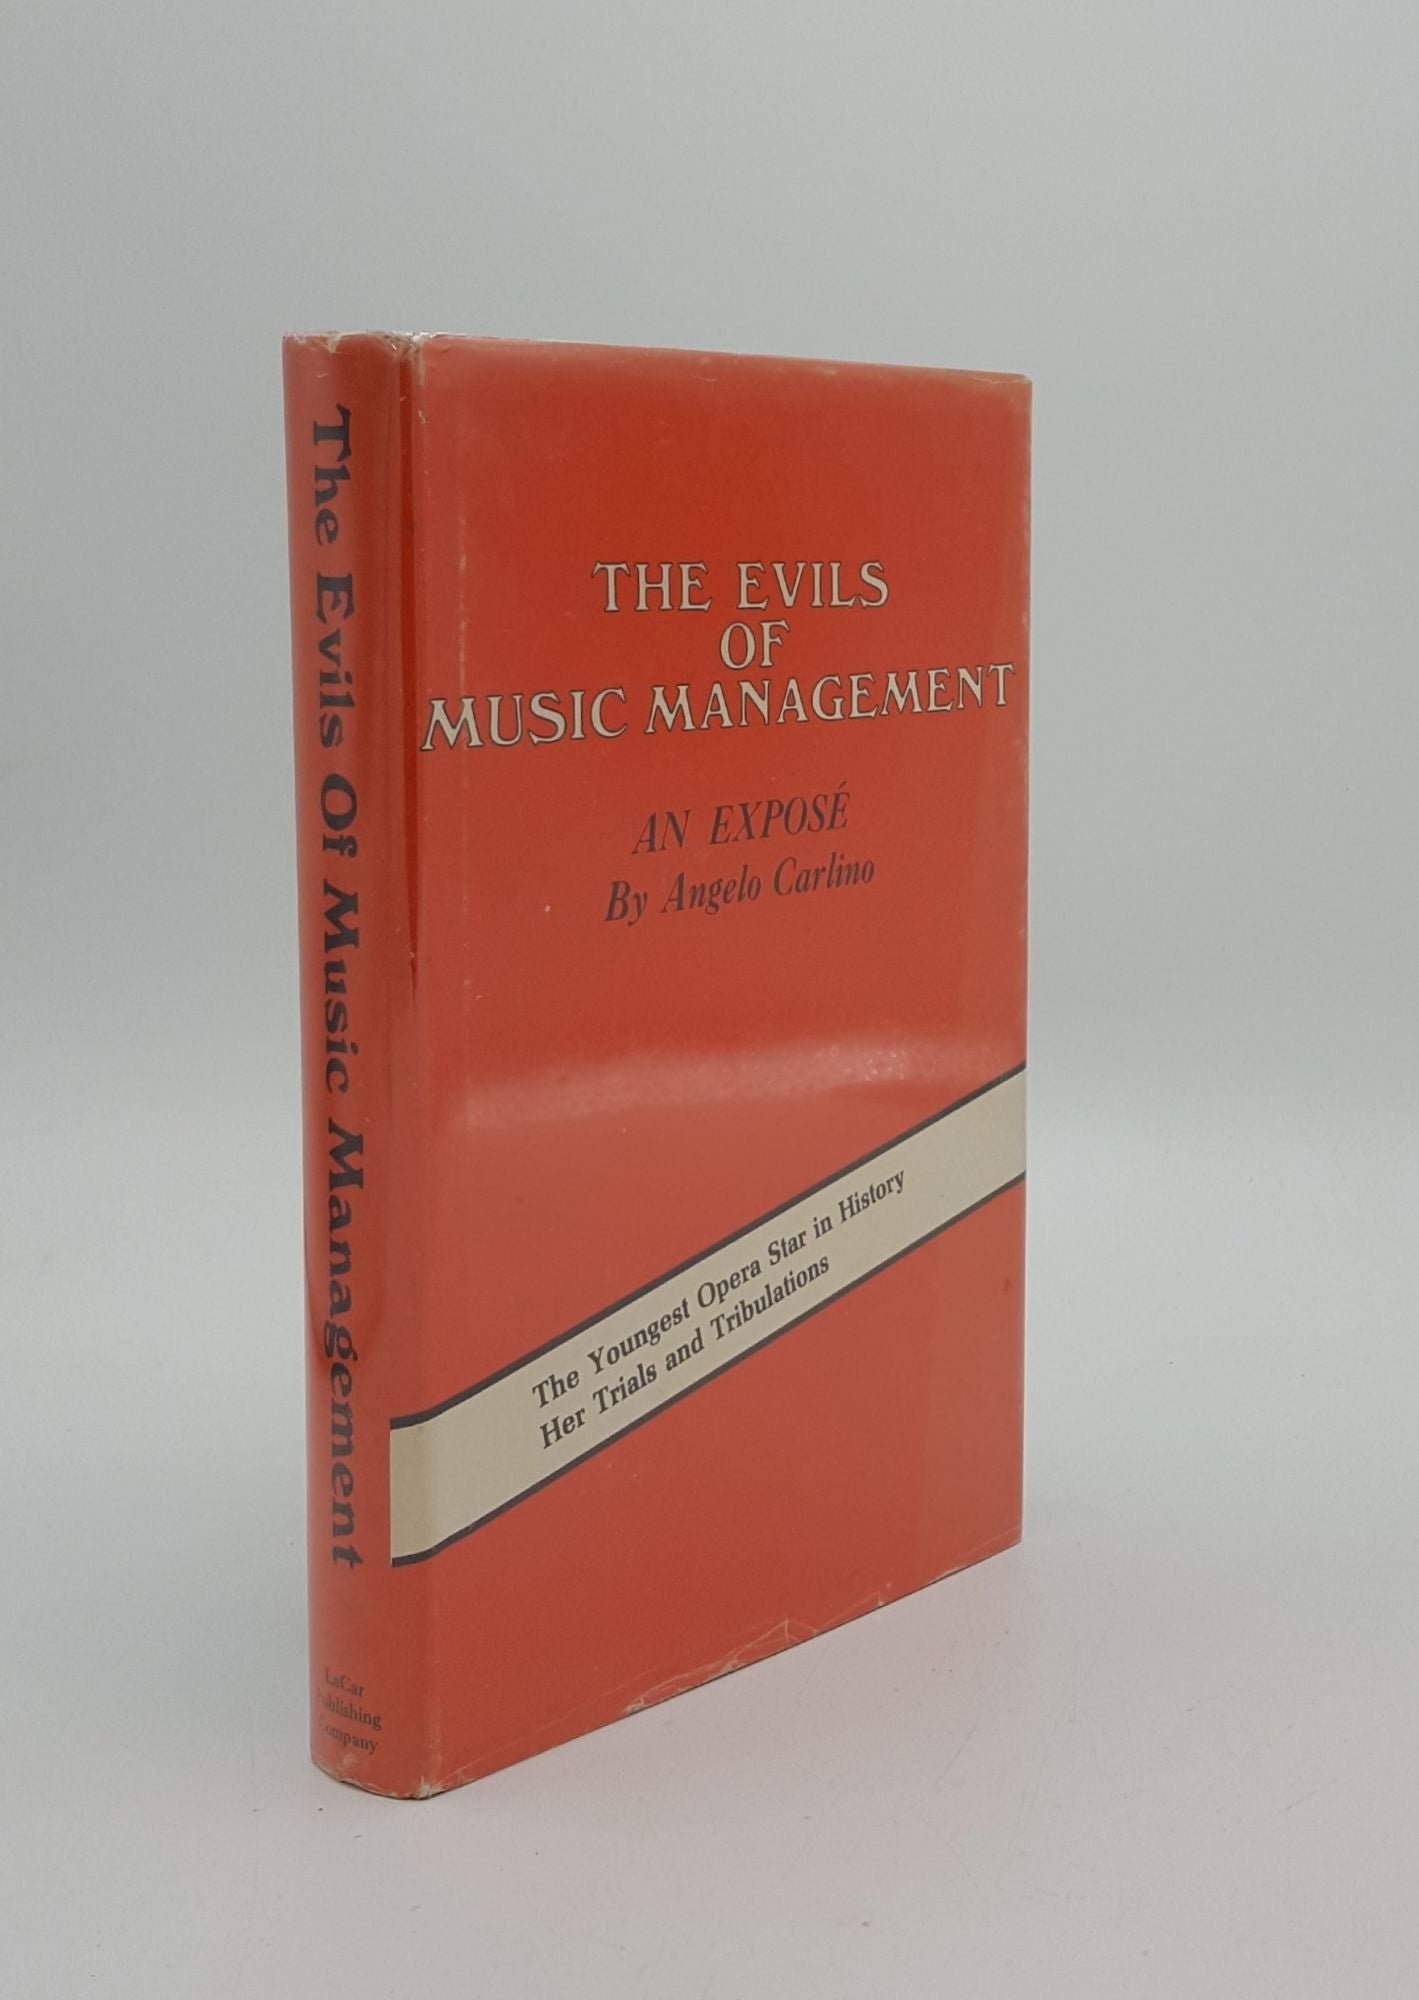 CARLINO Angelo - The Evils of Music Management